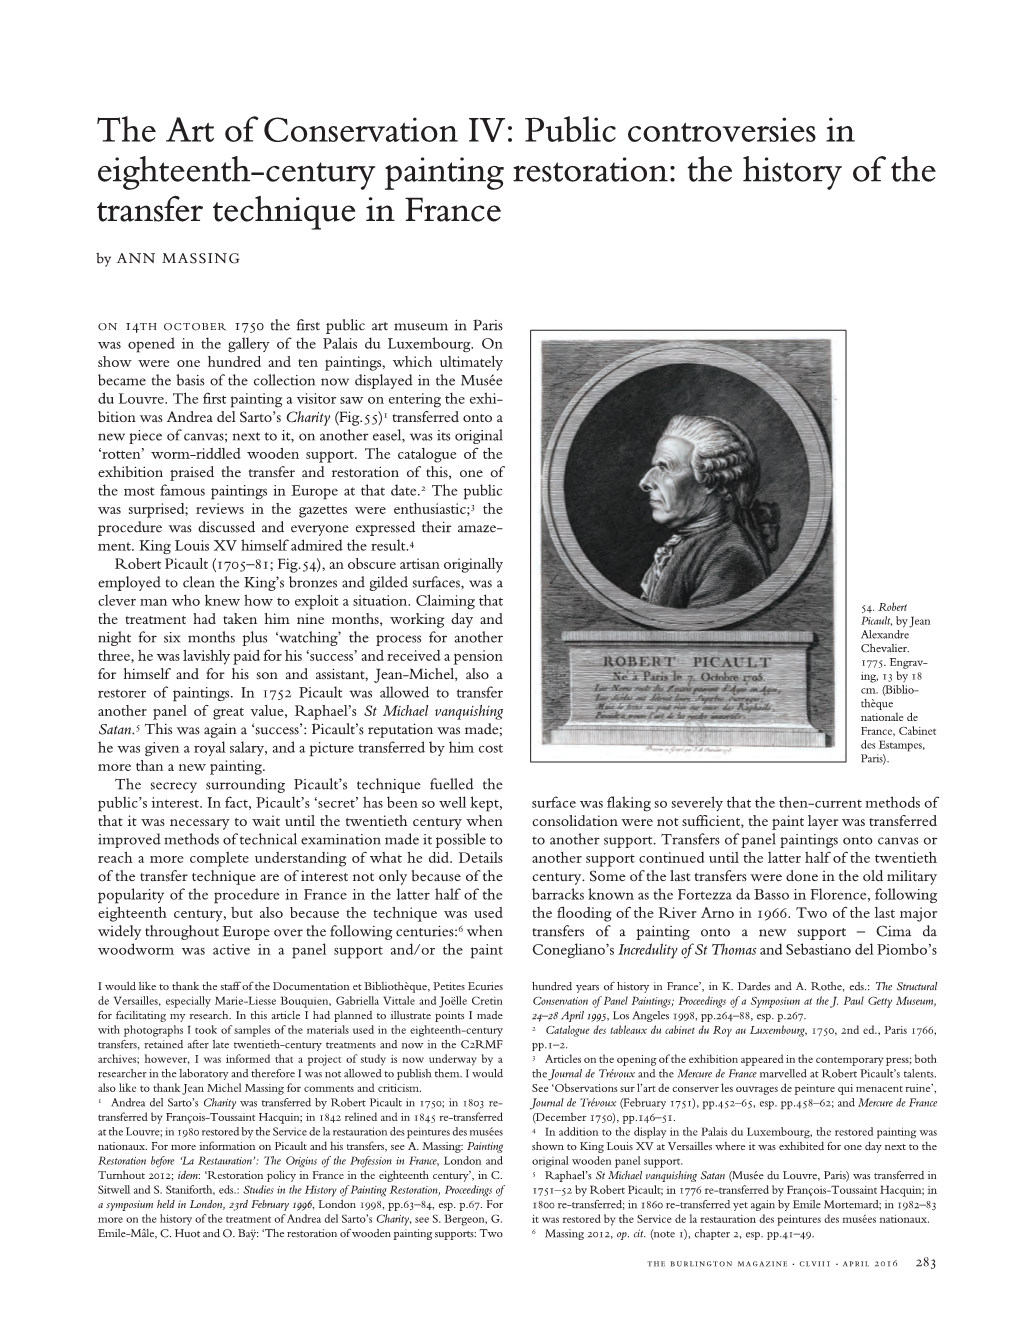 The Art of Conservation IV: Public Controversies in Eighteenth-Century Painting Restoration: the History of the Transfer Technique in France